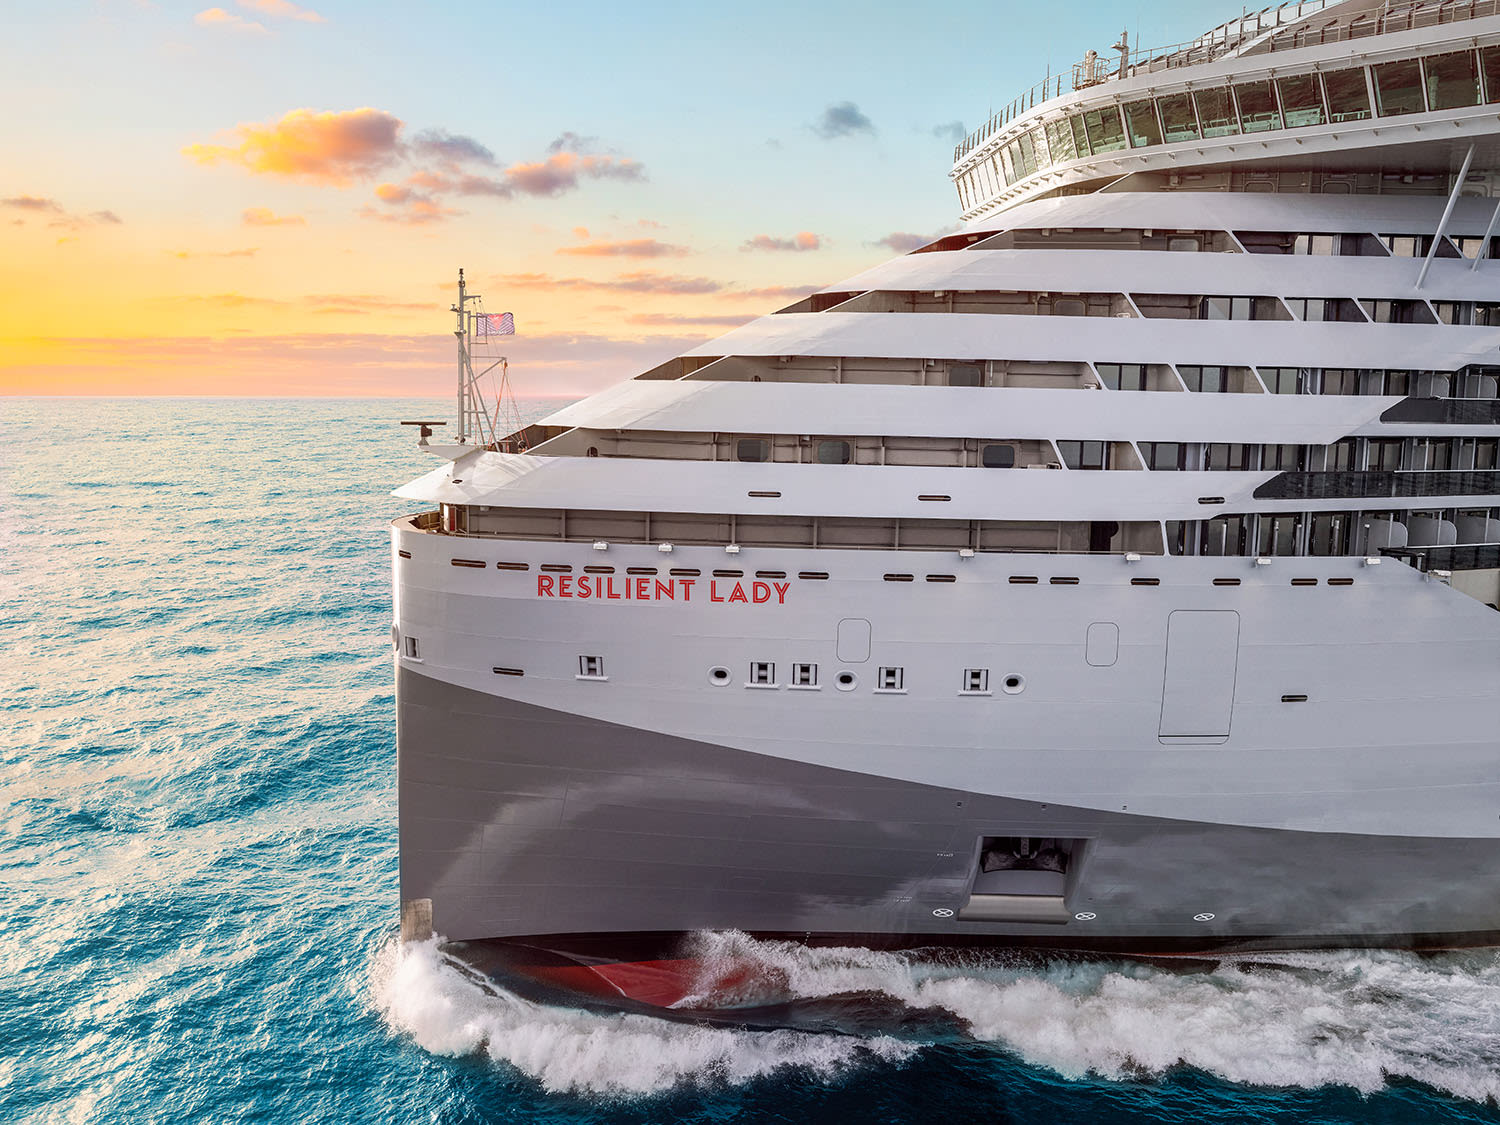 Starboard to replace Harding+ on Virgin Voyages lady ships